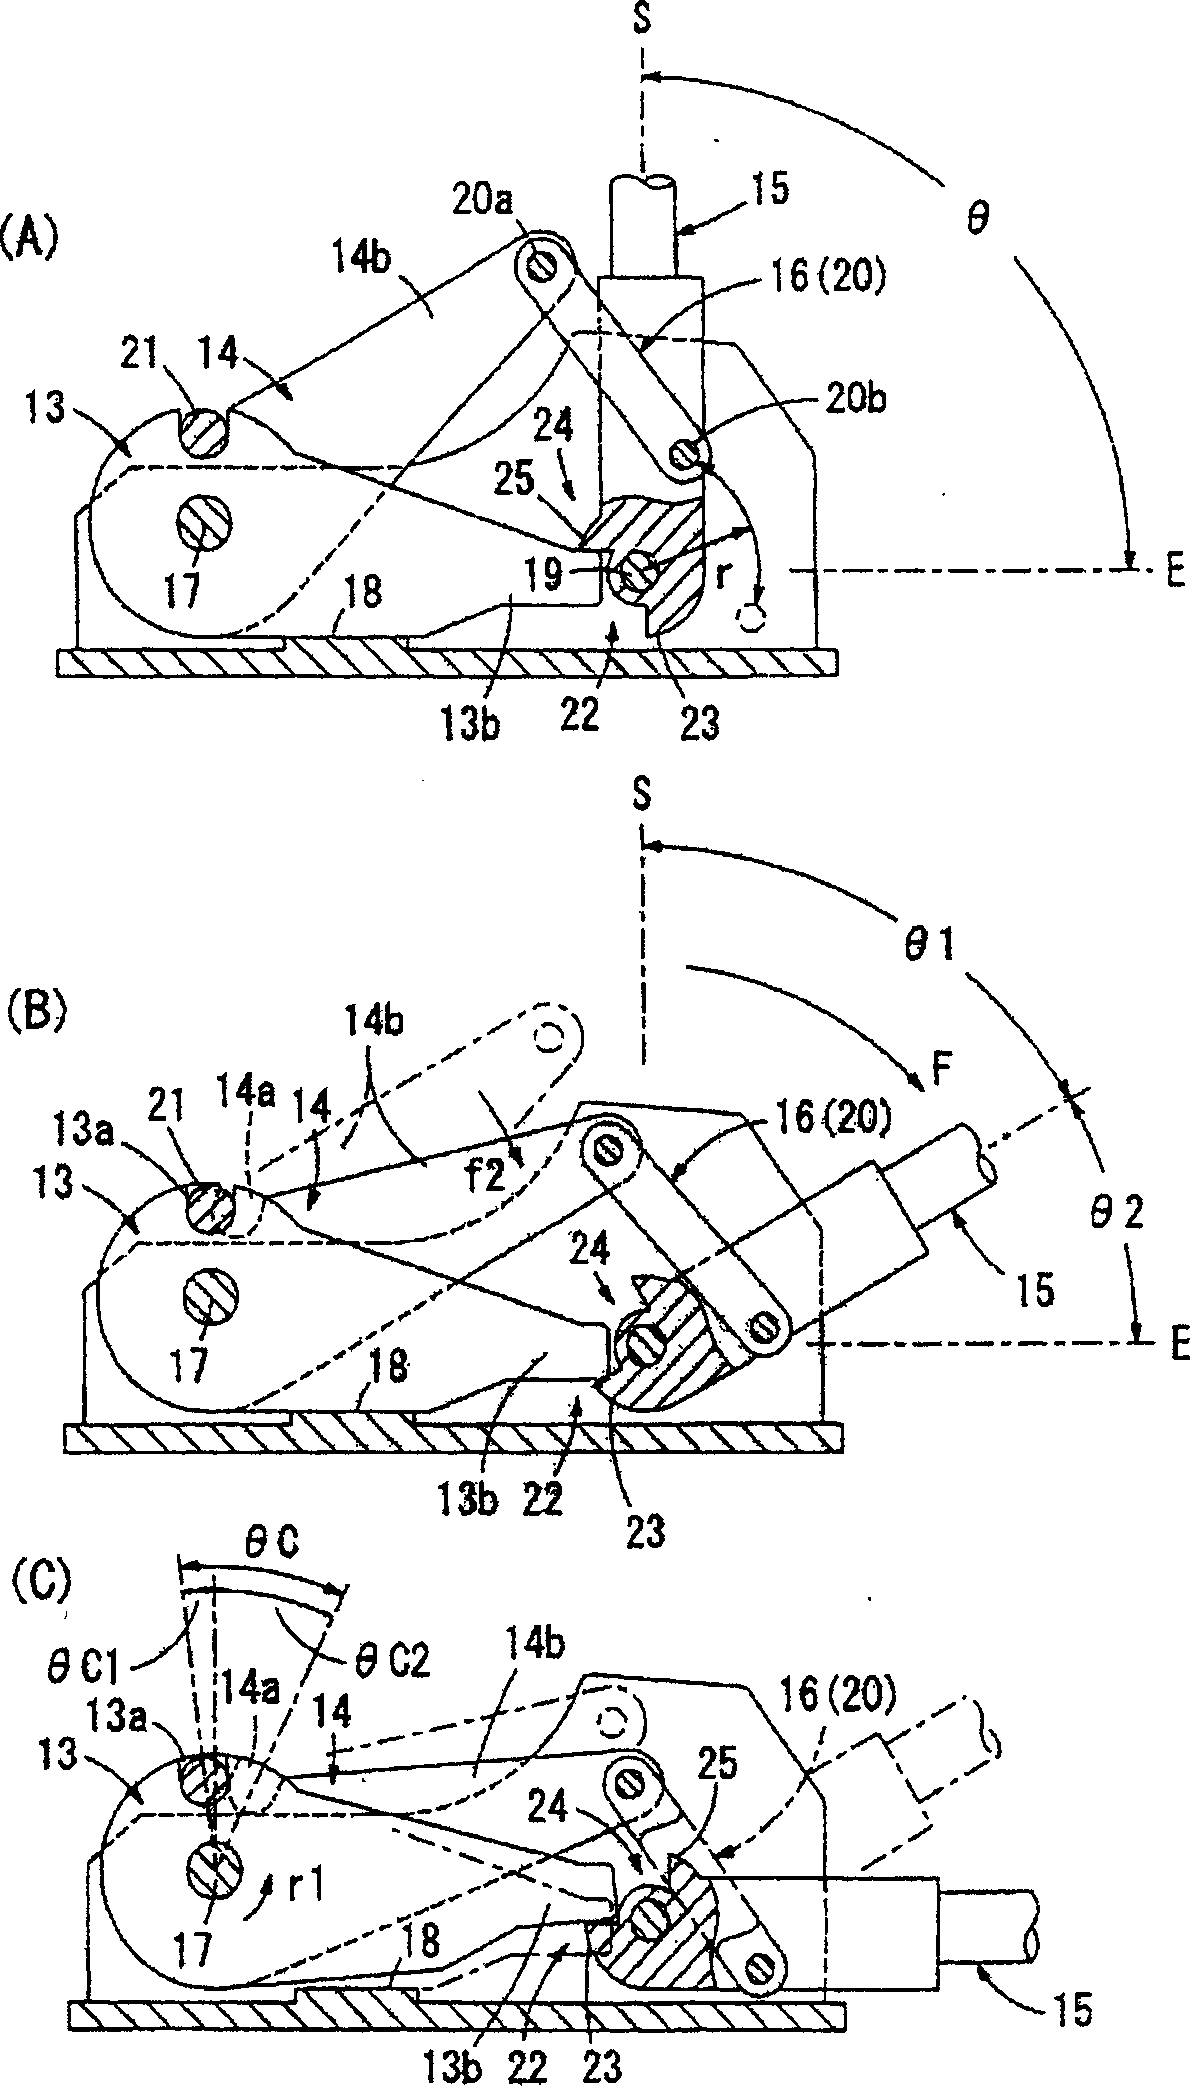 Cutting tool for stick material